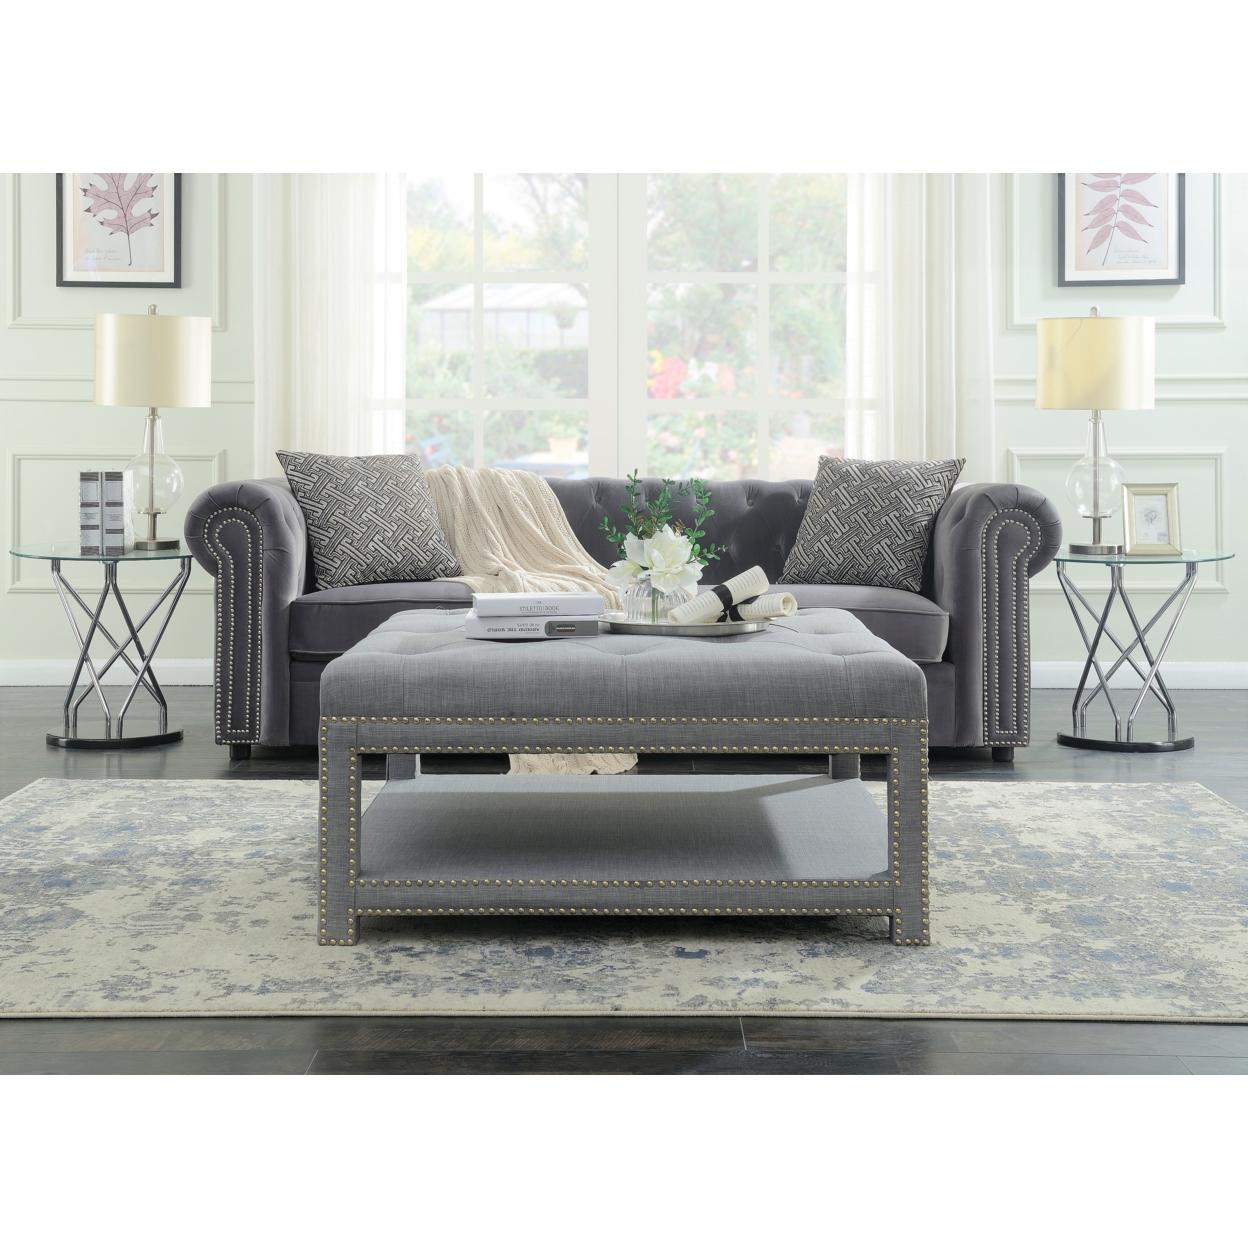 Quinn Coffee Table Ottoman 2-Layer Polished Nailhead Tufted Linen Bench - Gray